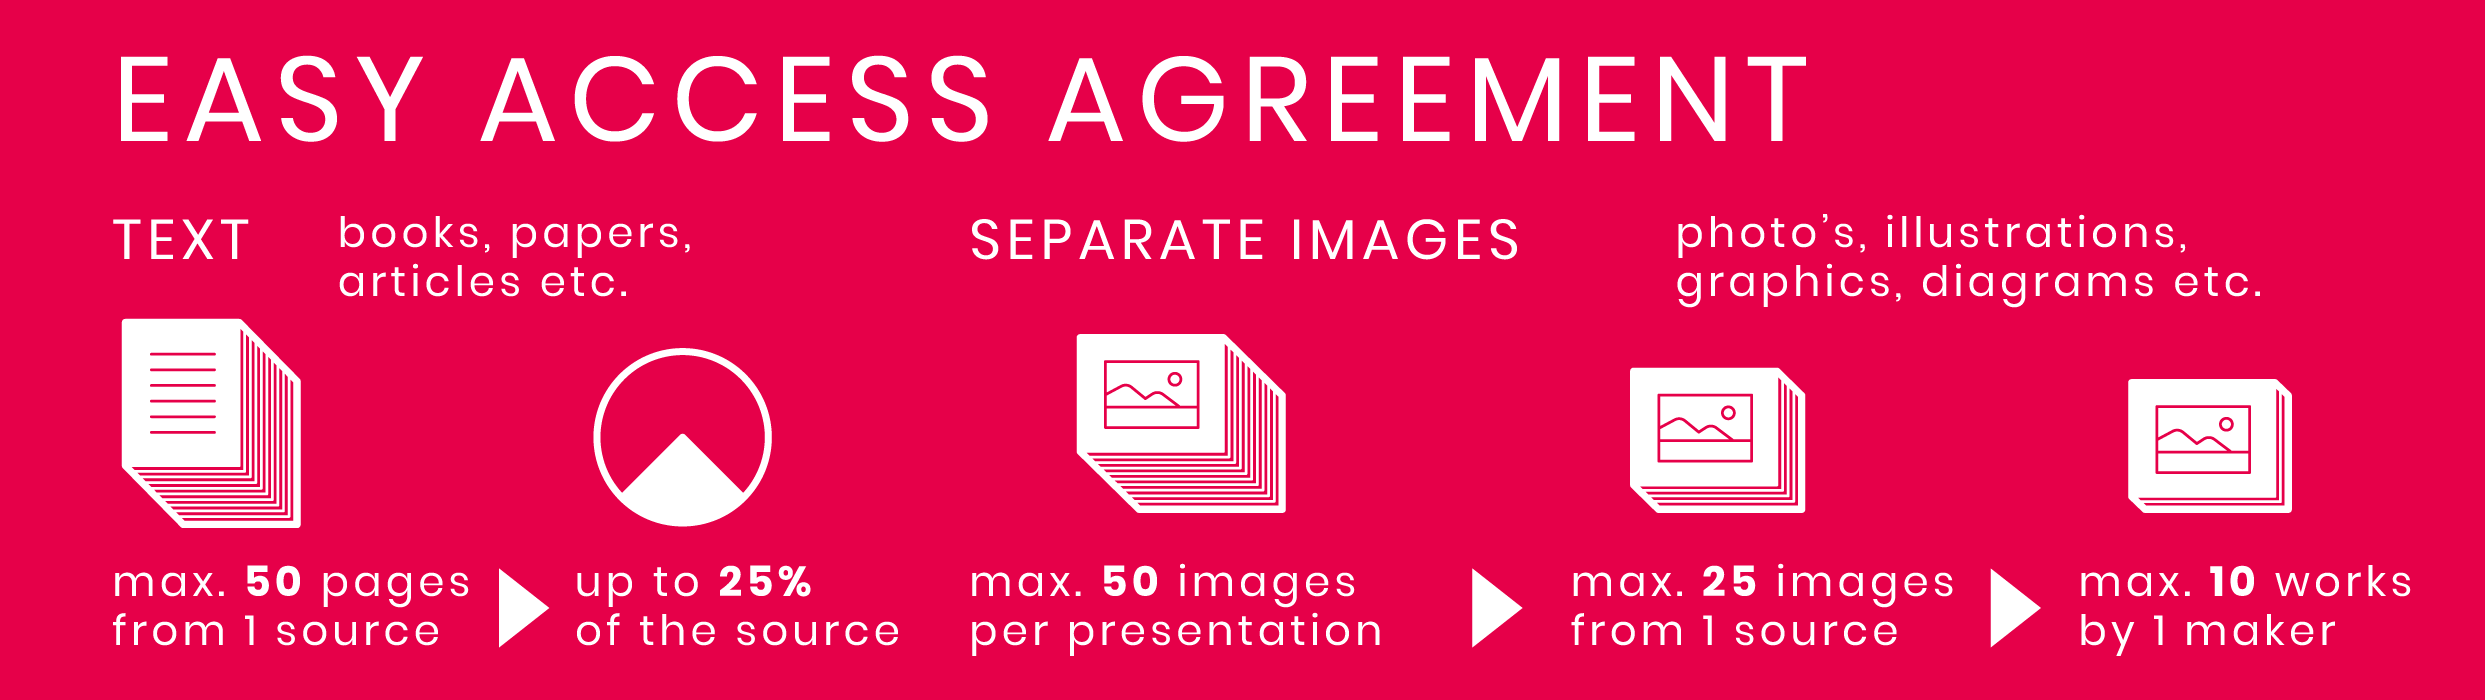 Easy Access Agreement infographic